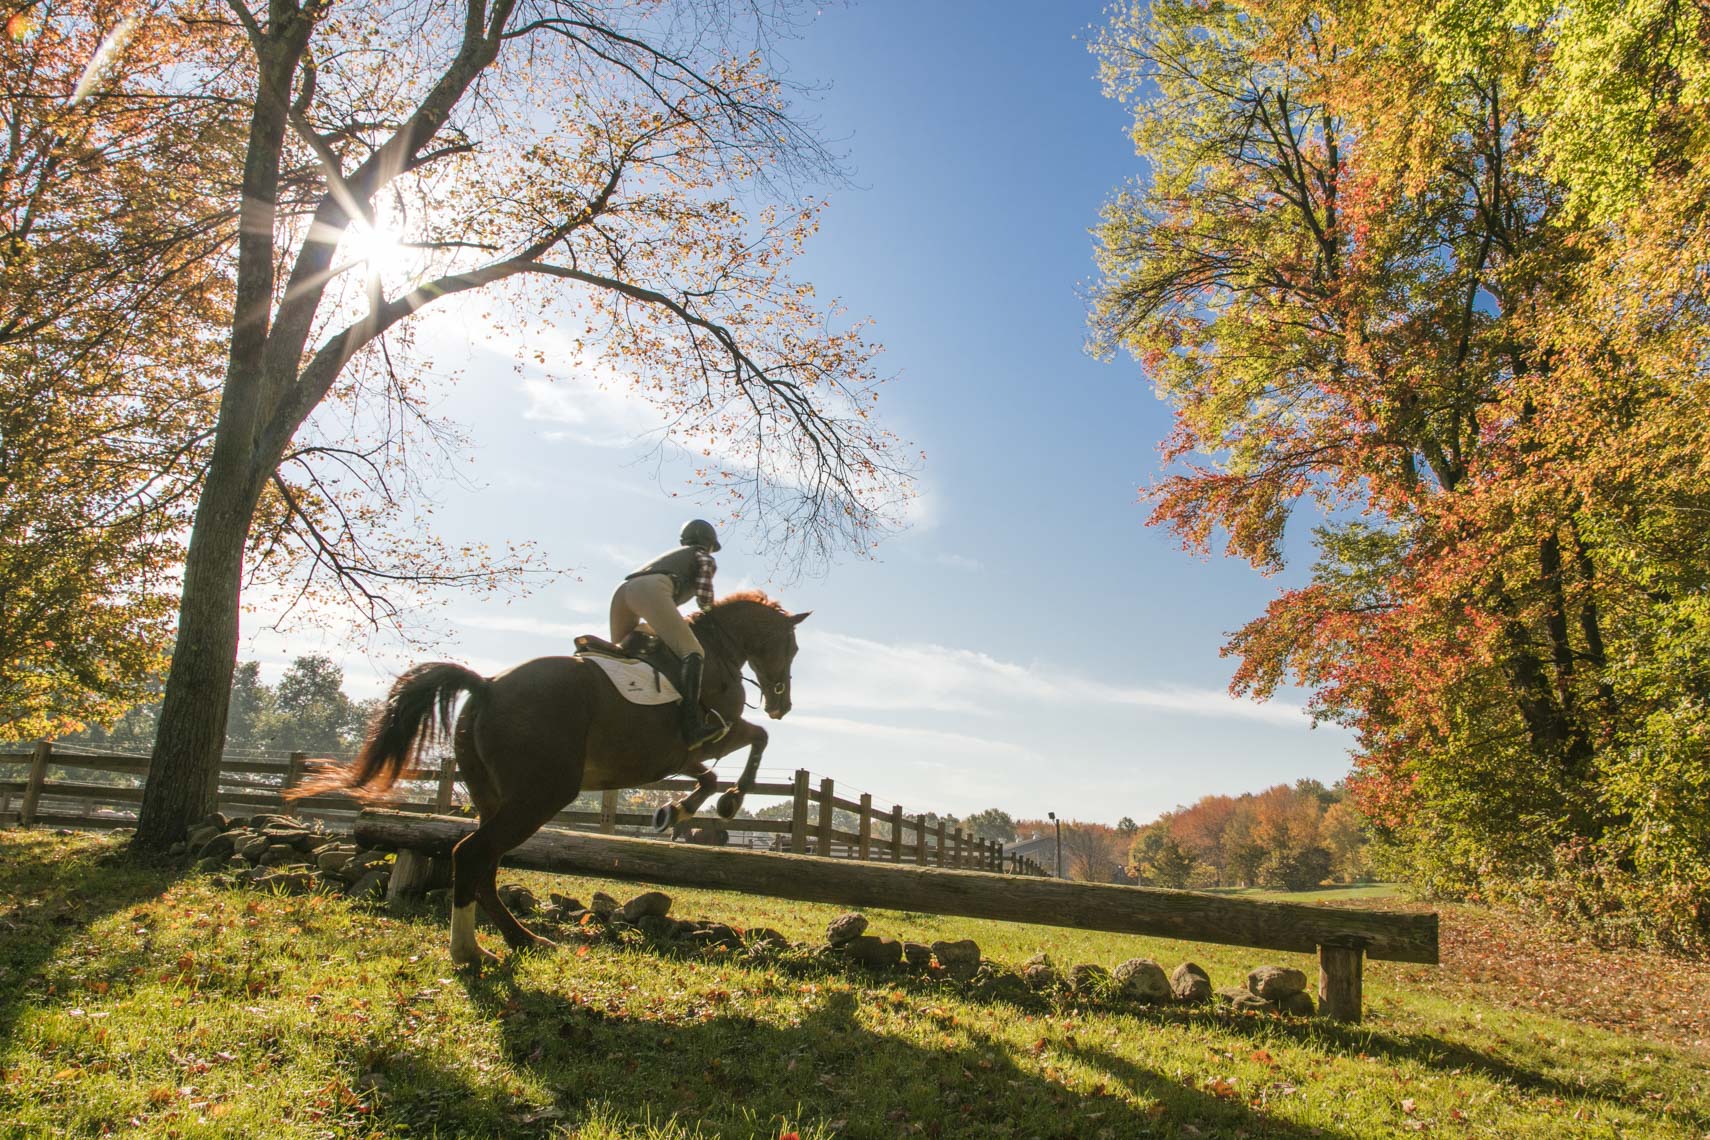 A member of a college equestrian team jumps her horse in a photo by Ryan Donnell